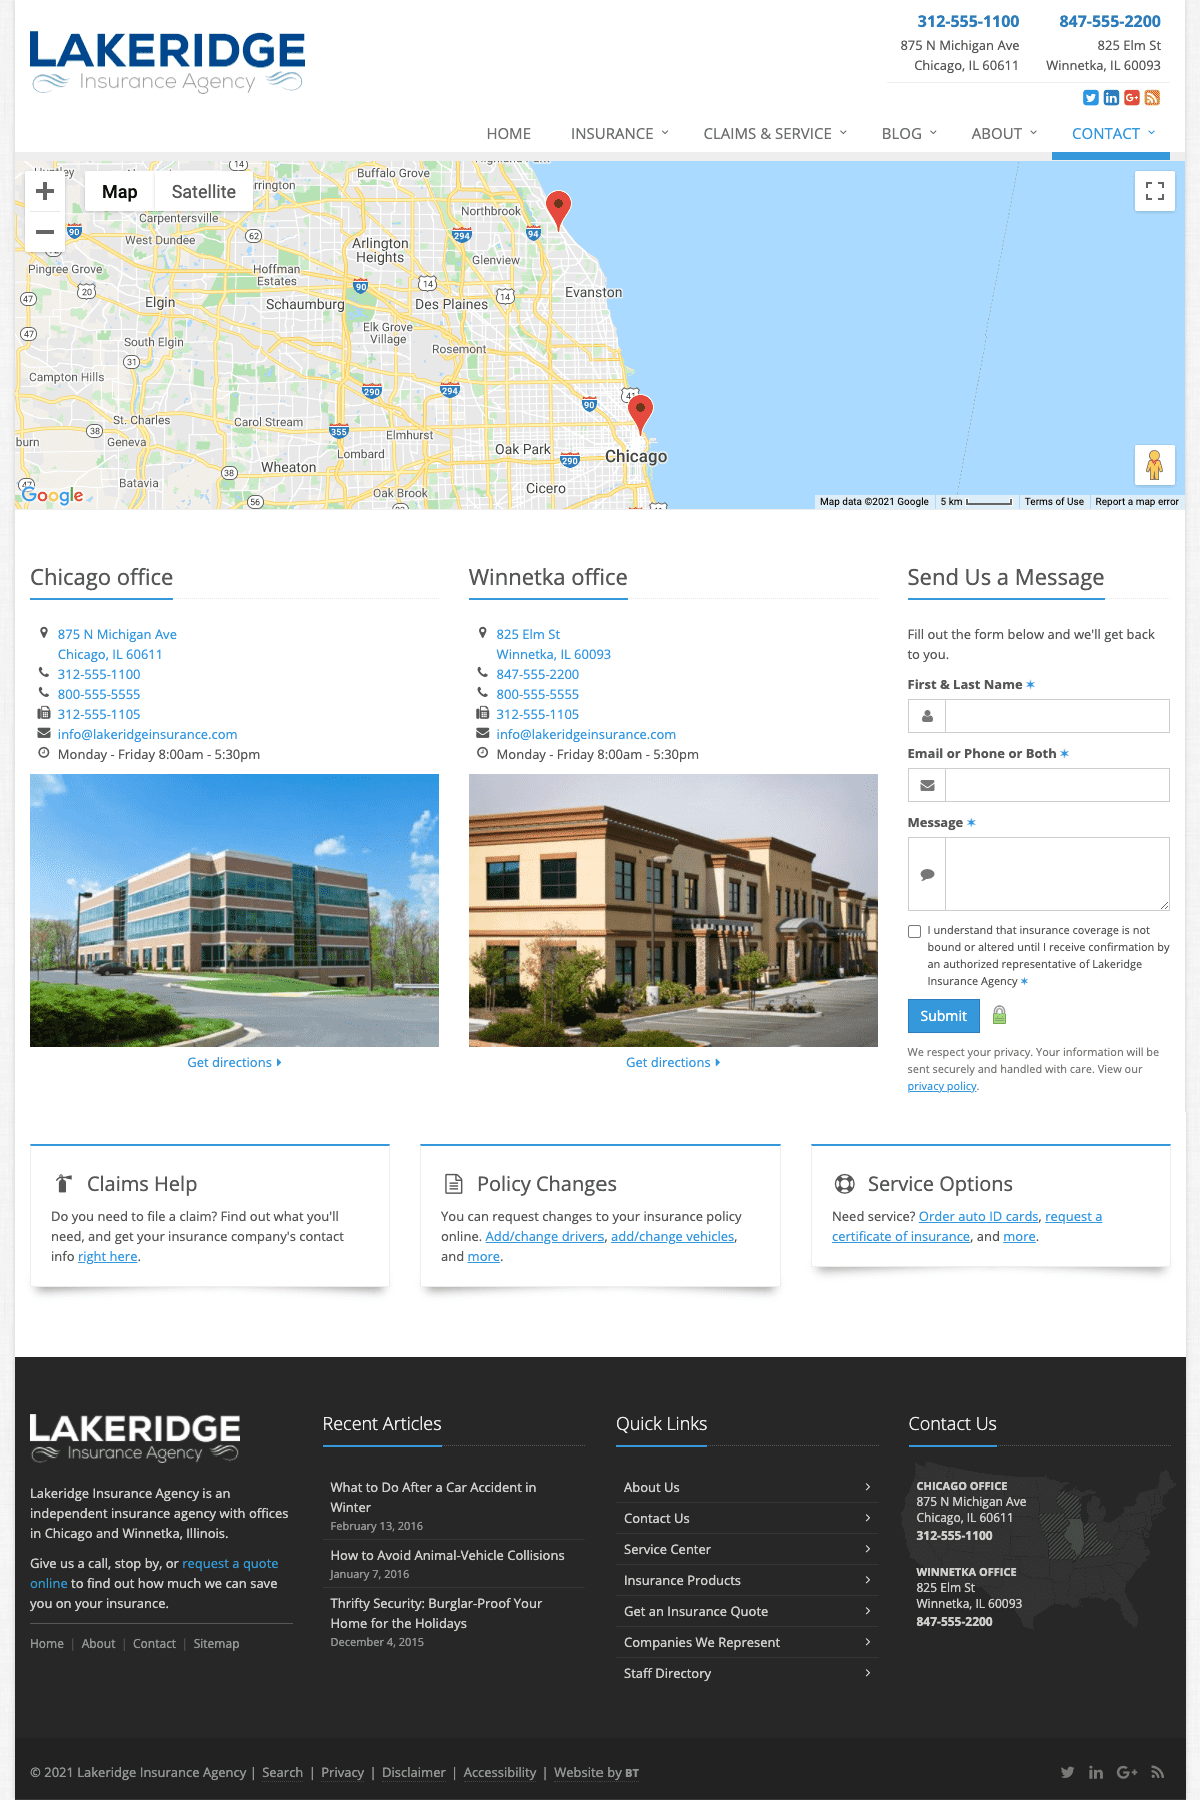 Screenshot showing multiple offices on the Contact Us page of lakeridgeinsurance.com